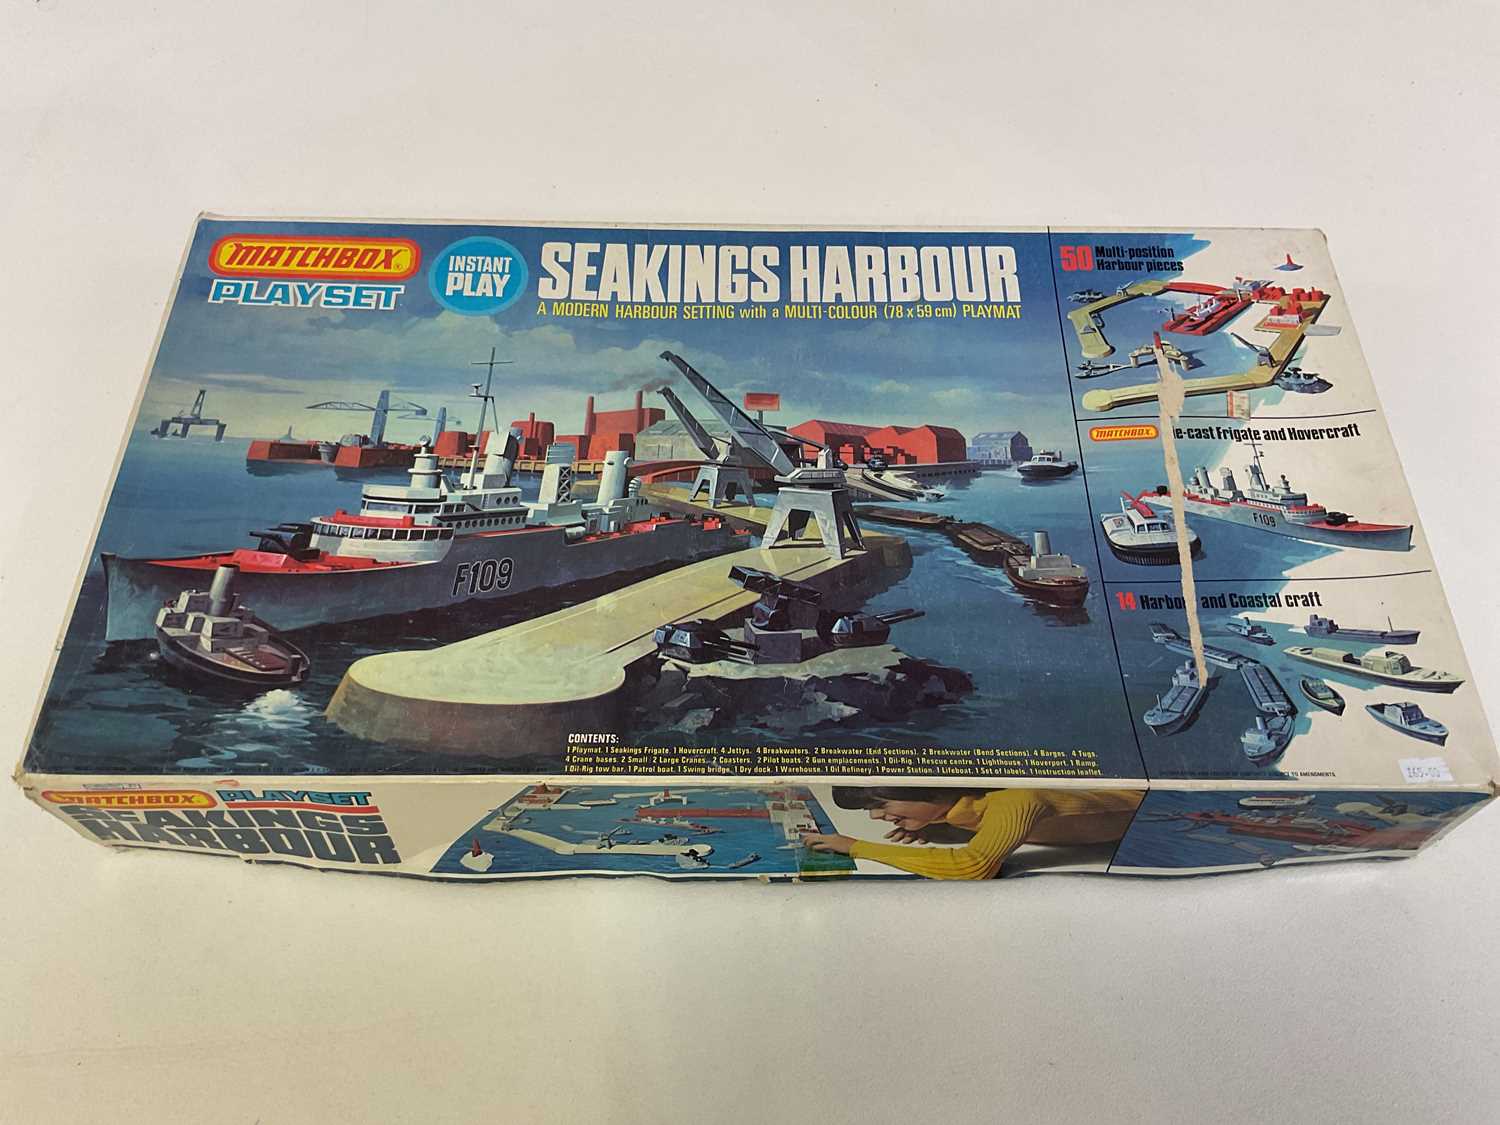 MATCHBOX; a Sea Kings Harbour Playset, with extra Battleship and a Tri-ang Queen Elizabeth liner,